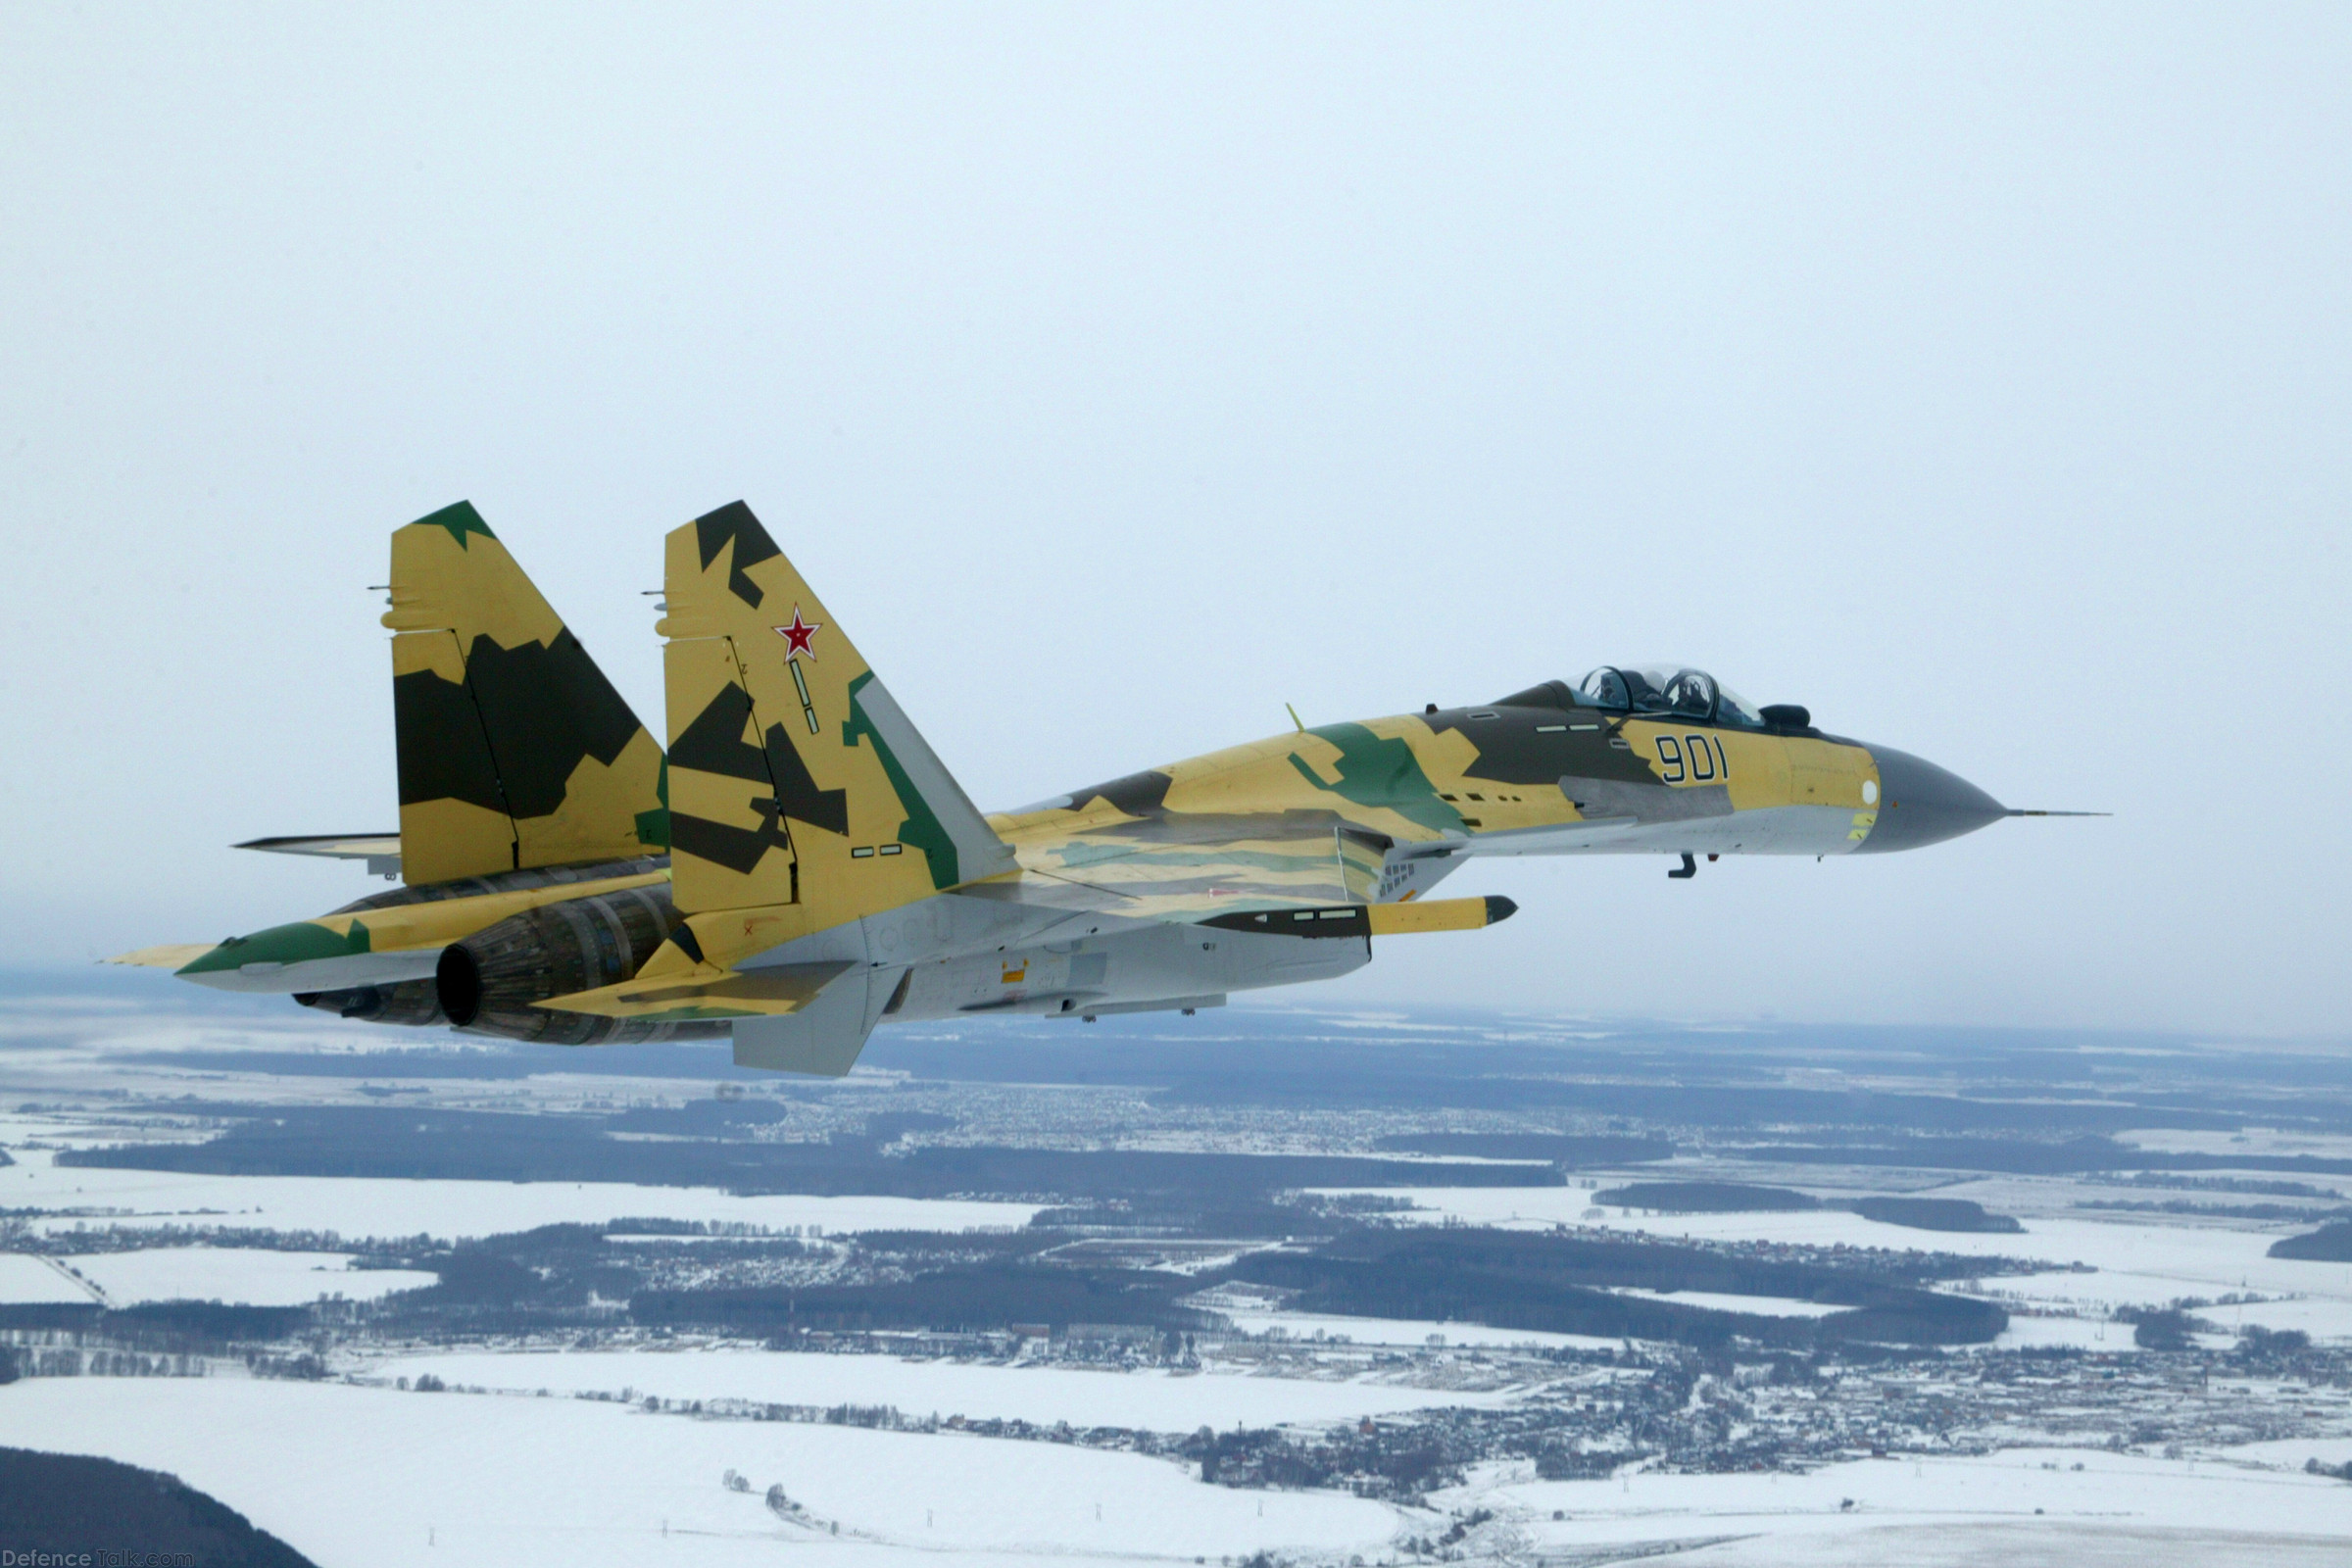 Su-35 Fighter Aircraft - Russian Air Force